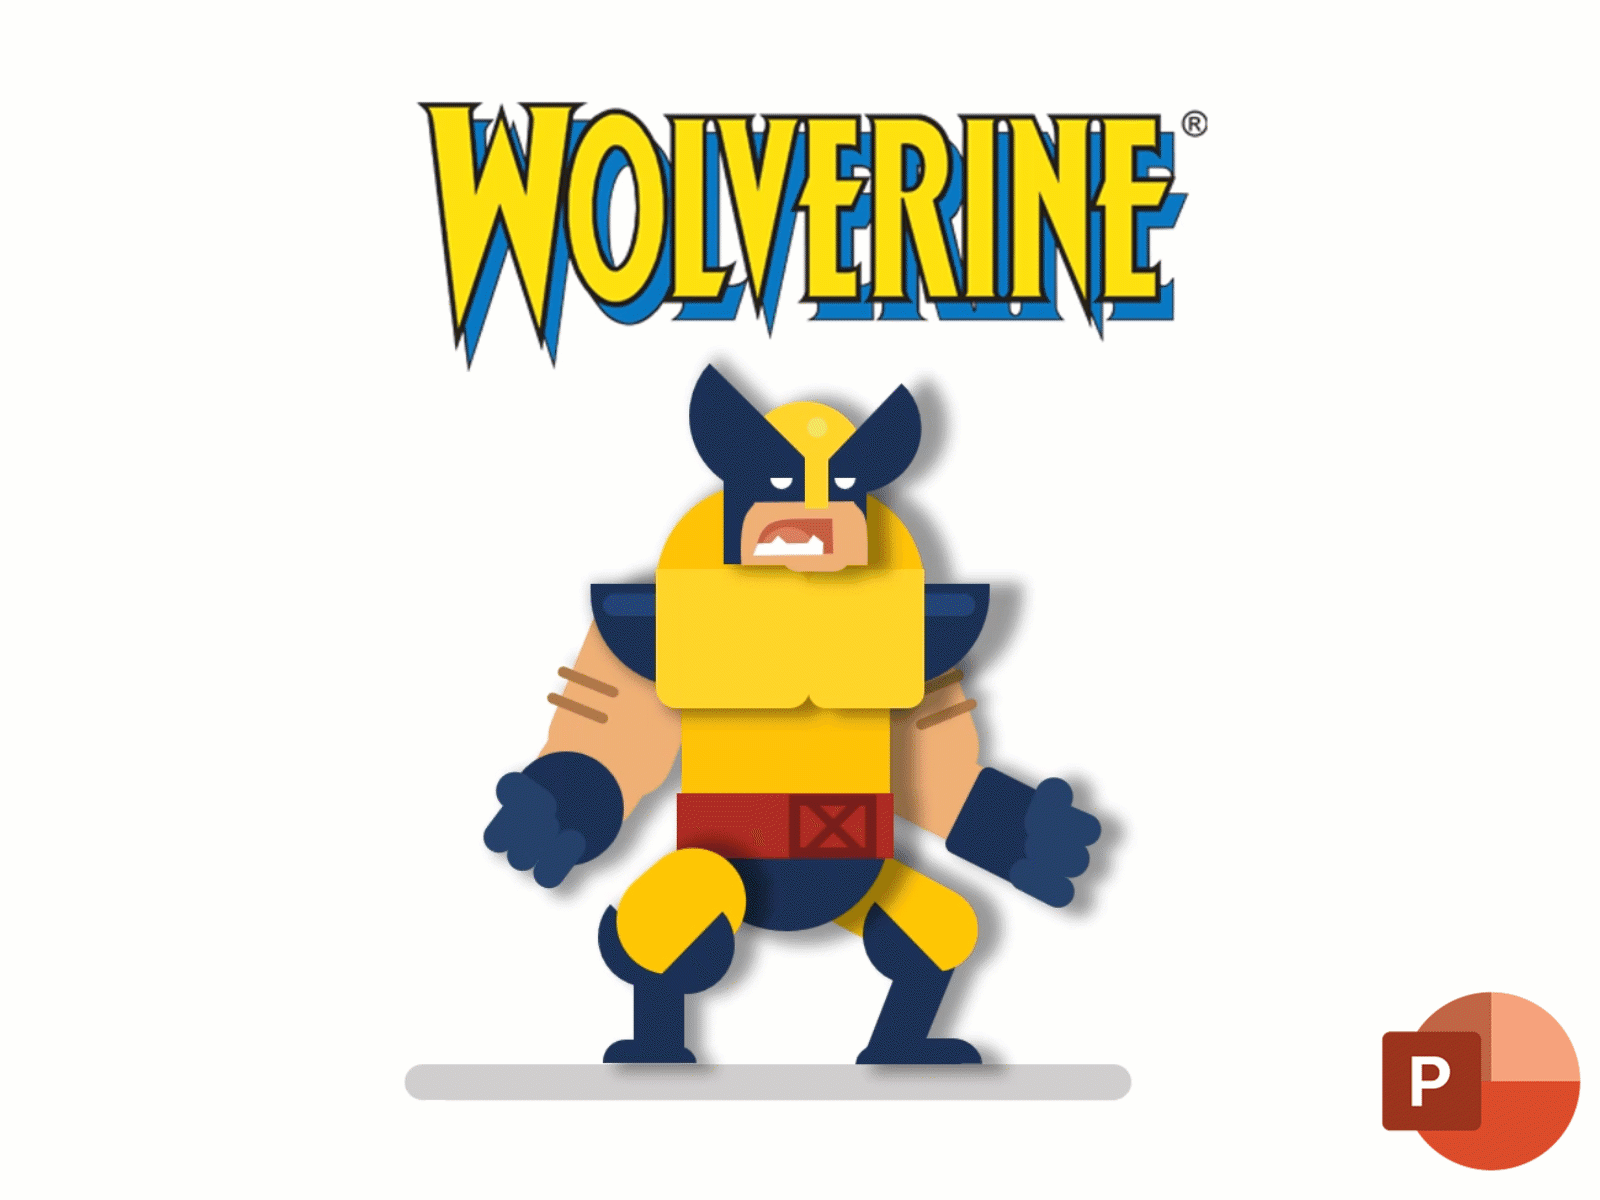 Wolverine Animation in PowerPoint animation animation in powerpoint animation powerpoint motion graphics powerpoint powerpoint animation powerpoint effects powerpoint presentation powerpoint template ppt animation wolverine animation